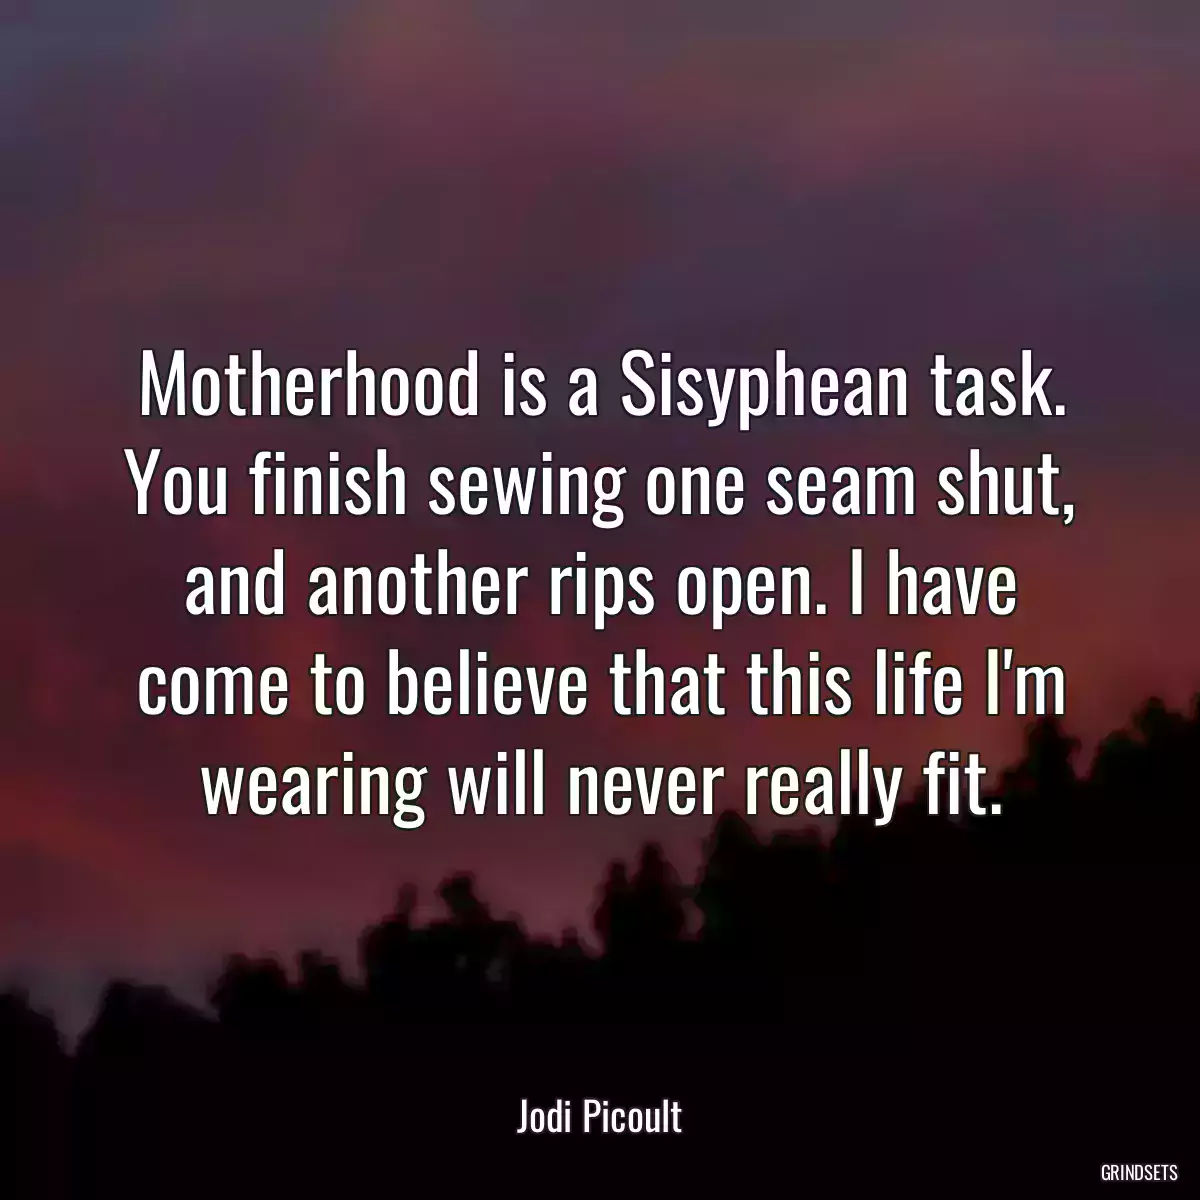 Motherhood is a Sisyphean task. You finish sewing one seam shut, and another rips open. I have come to believe that this life I\'m wearing will never really fit.